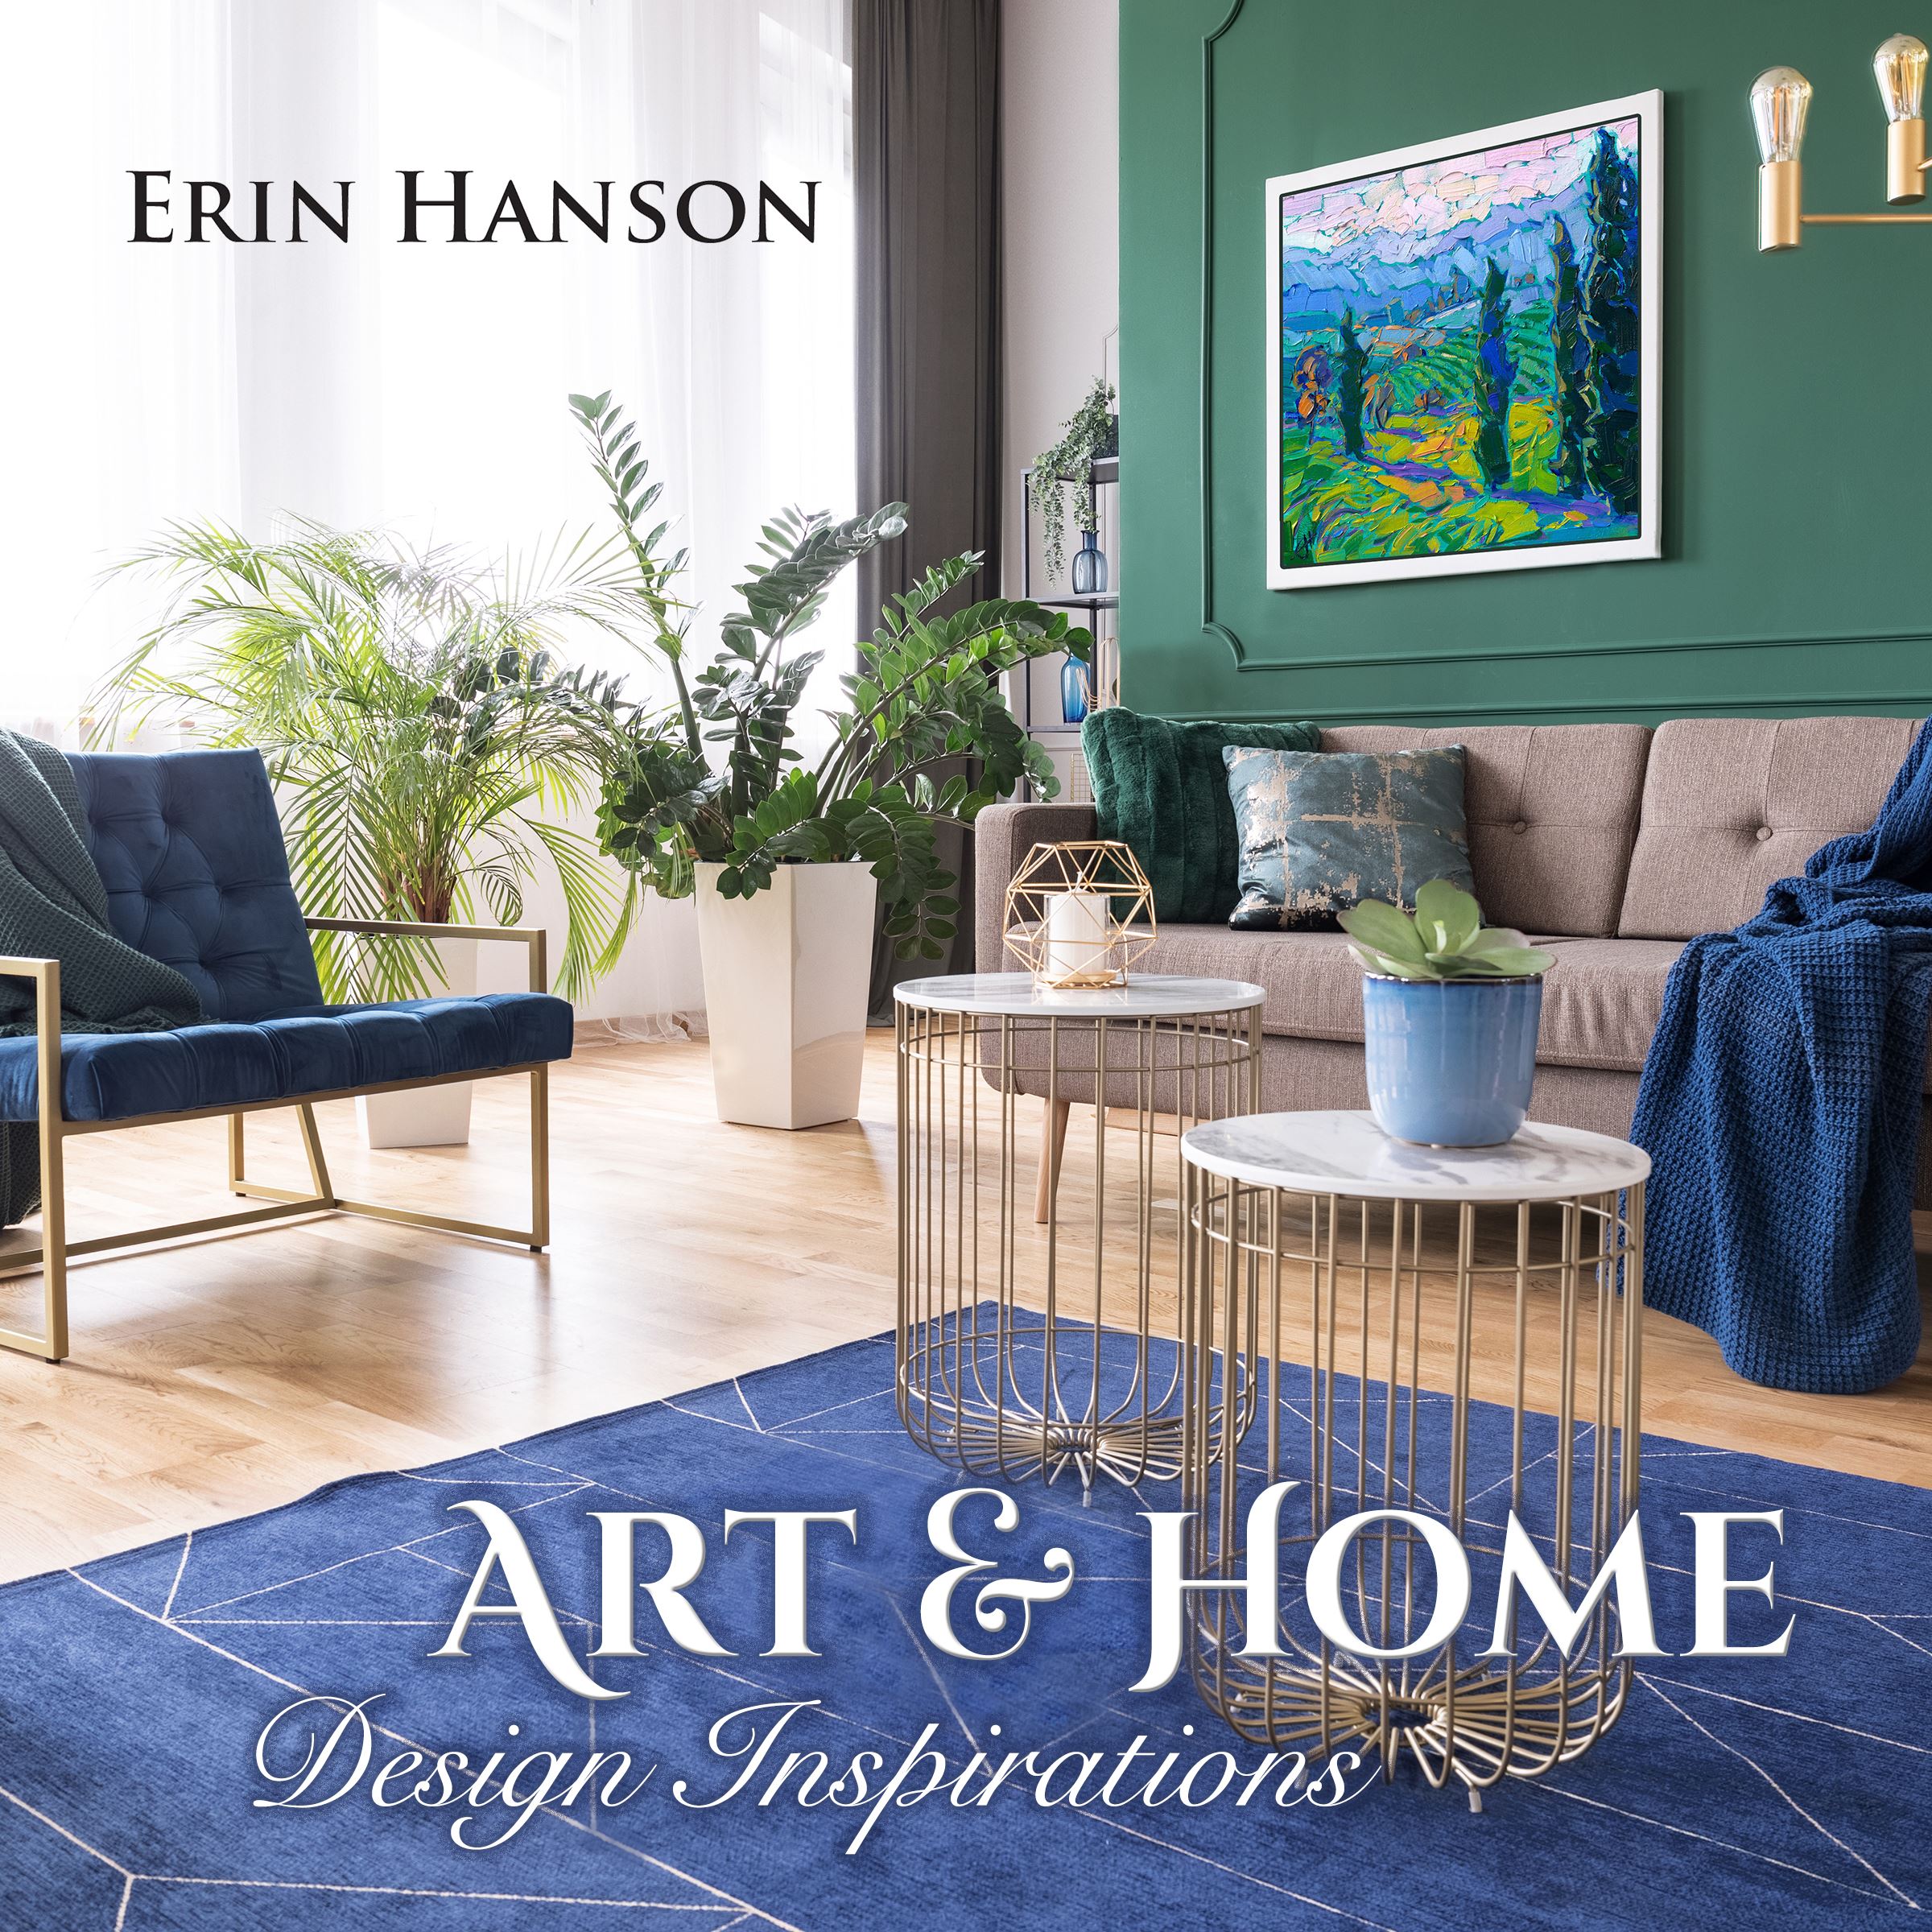  Design Inspirations Free eBook  here to download Erin Hanson&#39;s 50-page booklet filled with interior design tips and inspirations. 